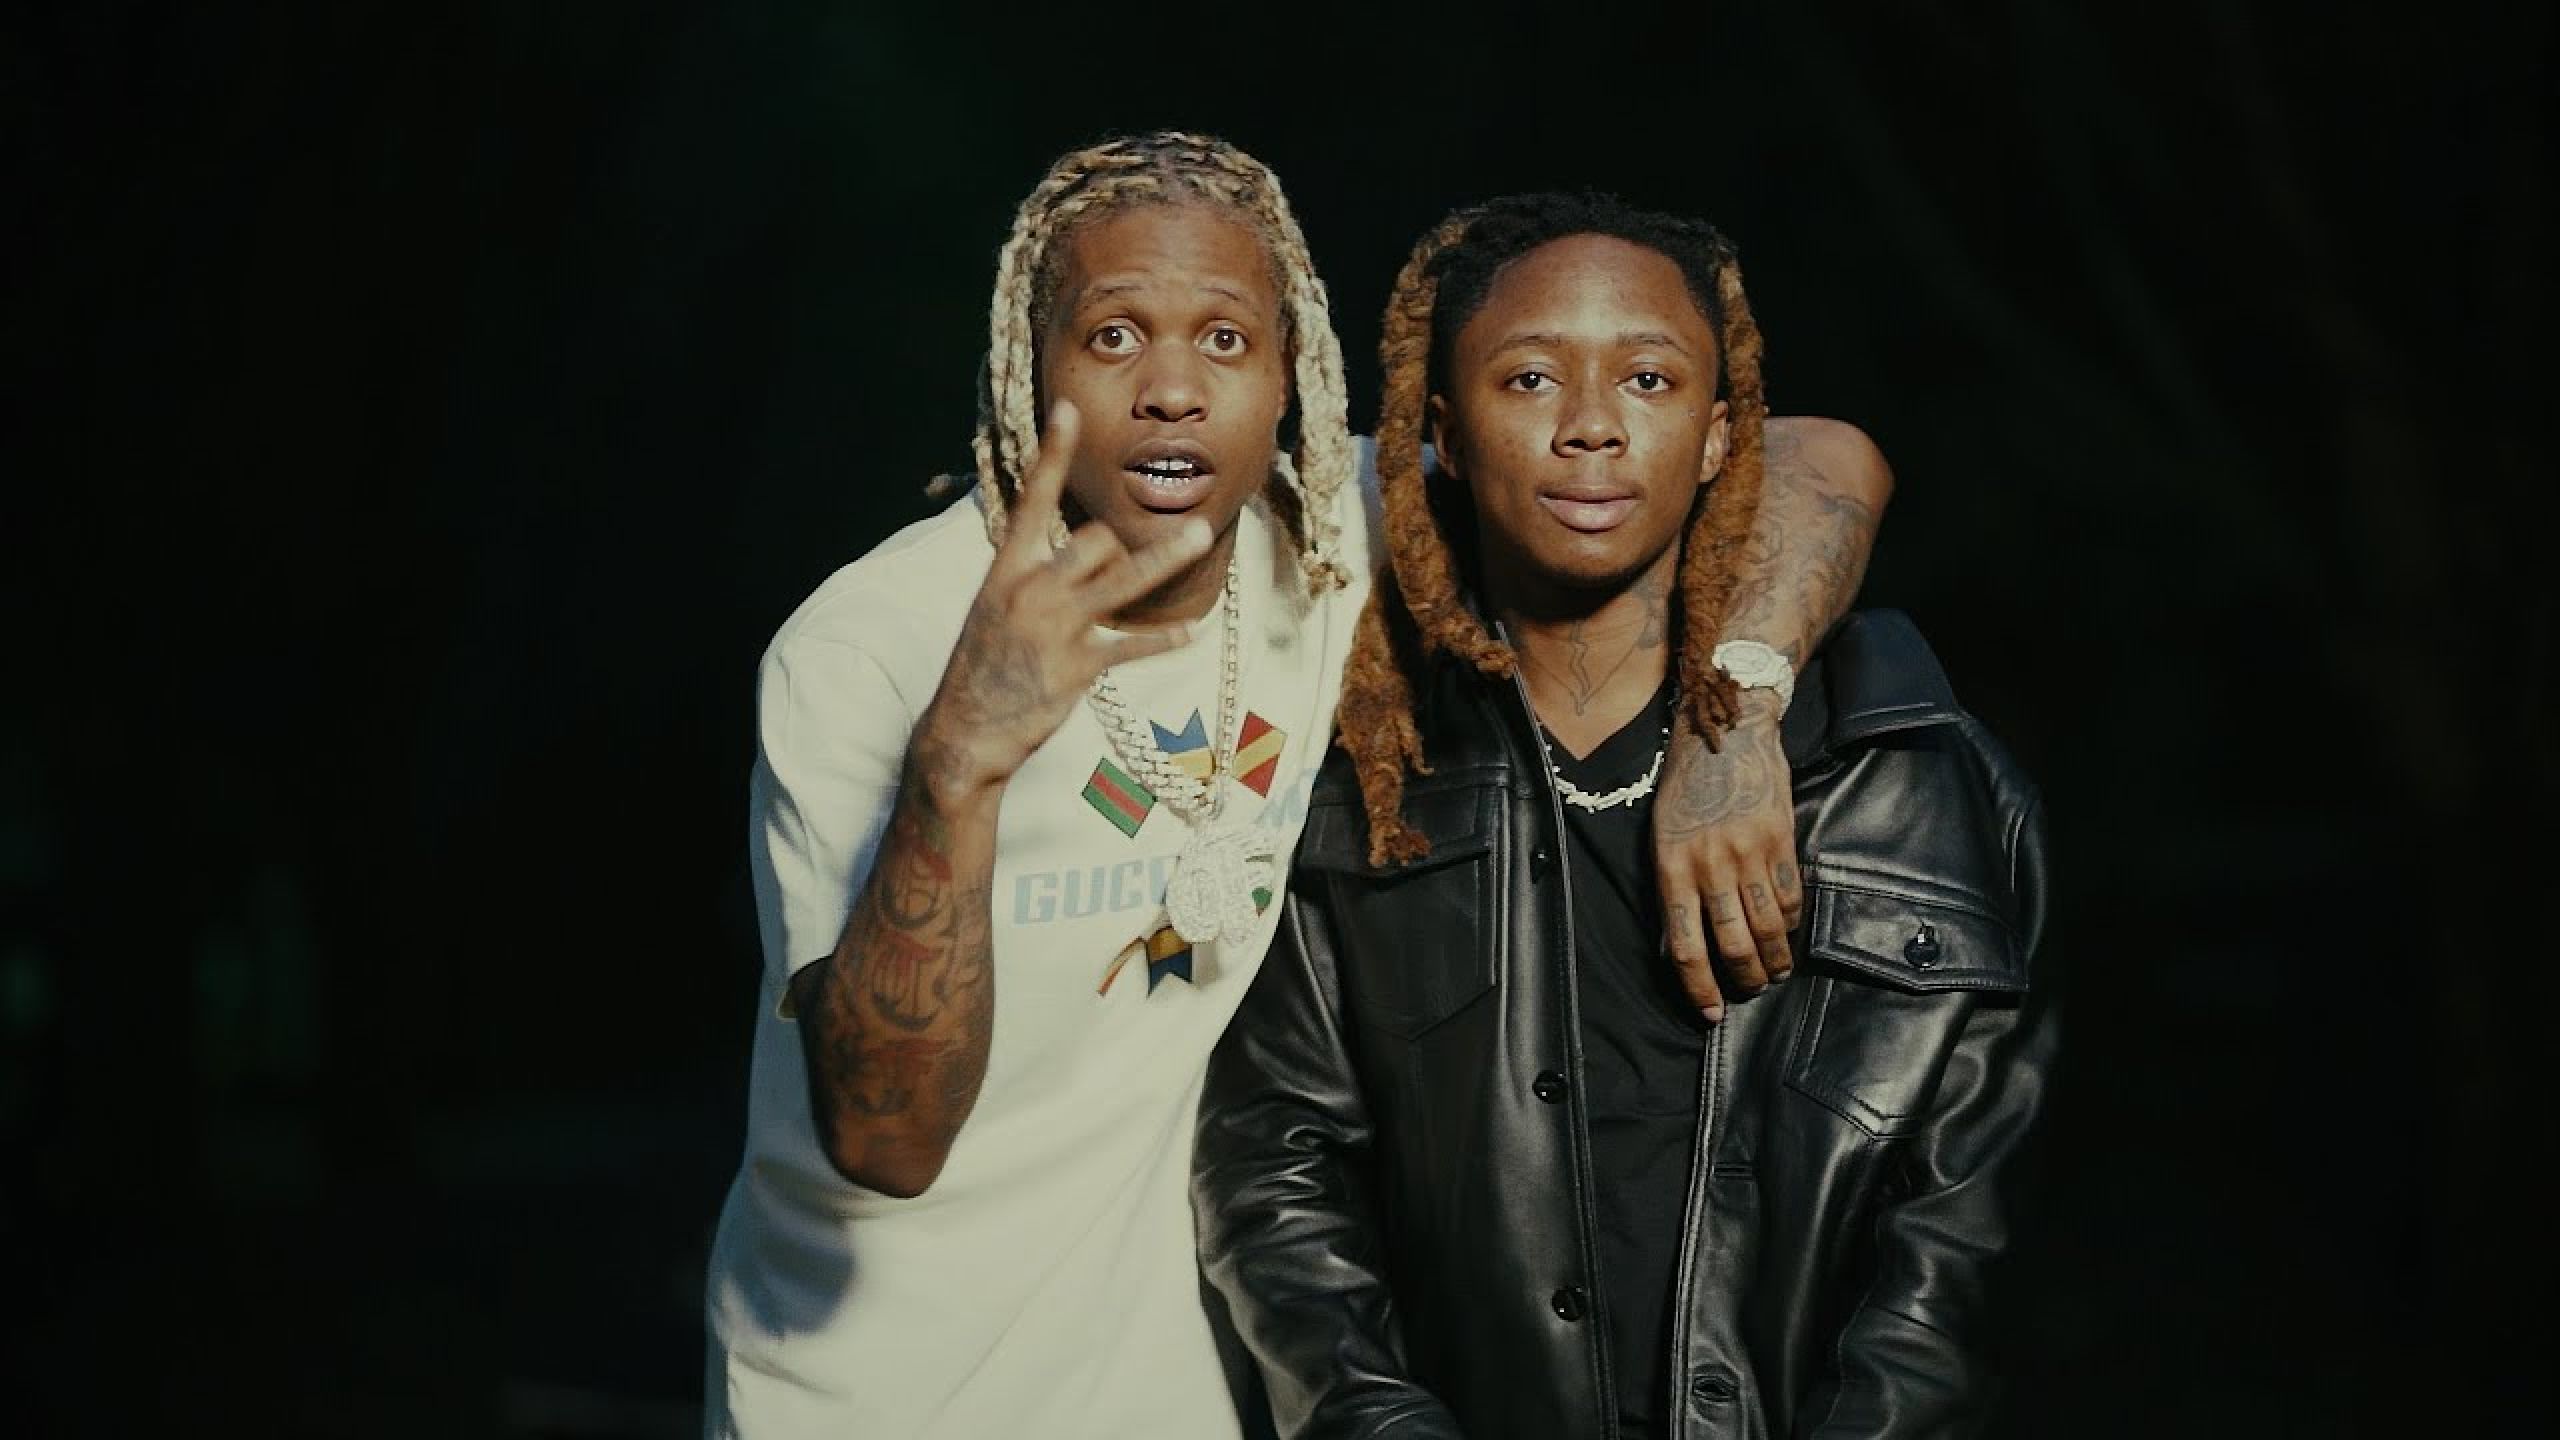 The t-shirt Gucci worn by Lil Durk in the video Brazy Life of Slimelife Sha...